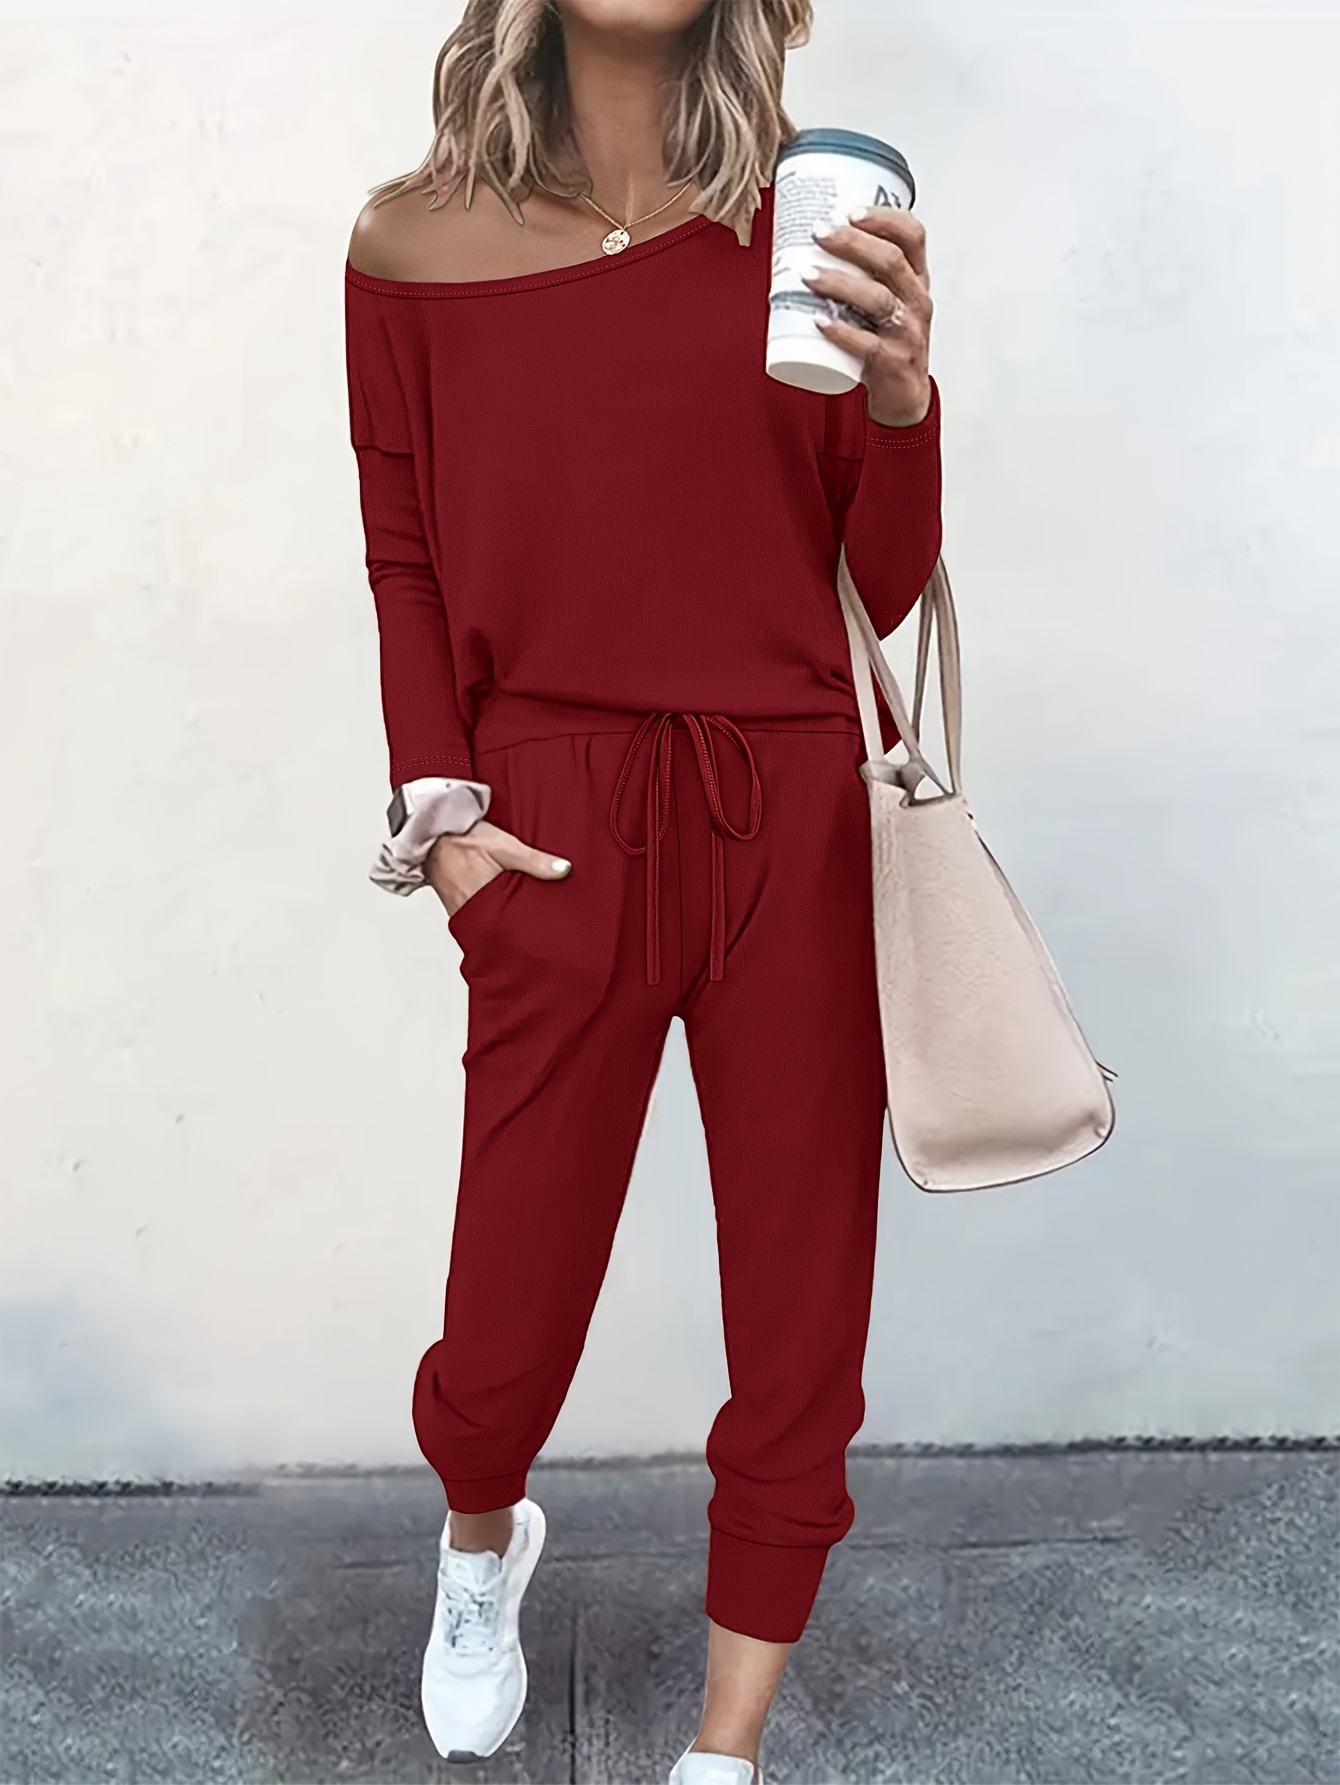 Two Piece Outfits for Women Solid Color Sweatsuits Sets 2 Pieces Jogger  Sets with Pockets Long Sleeve Jogging Sweat Suit